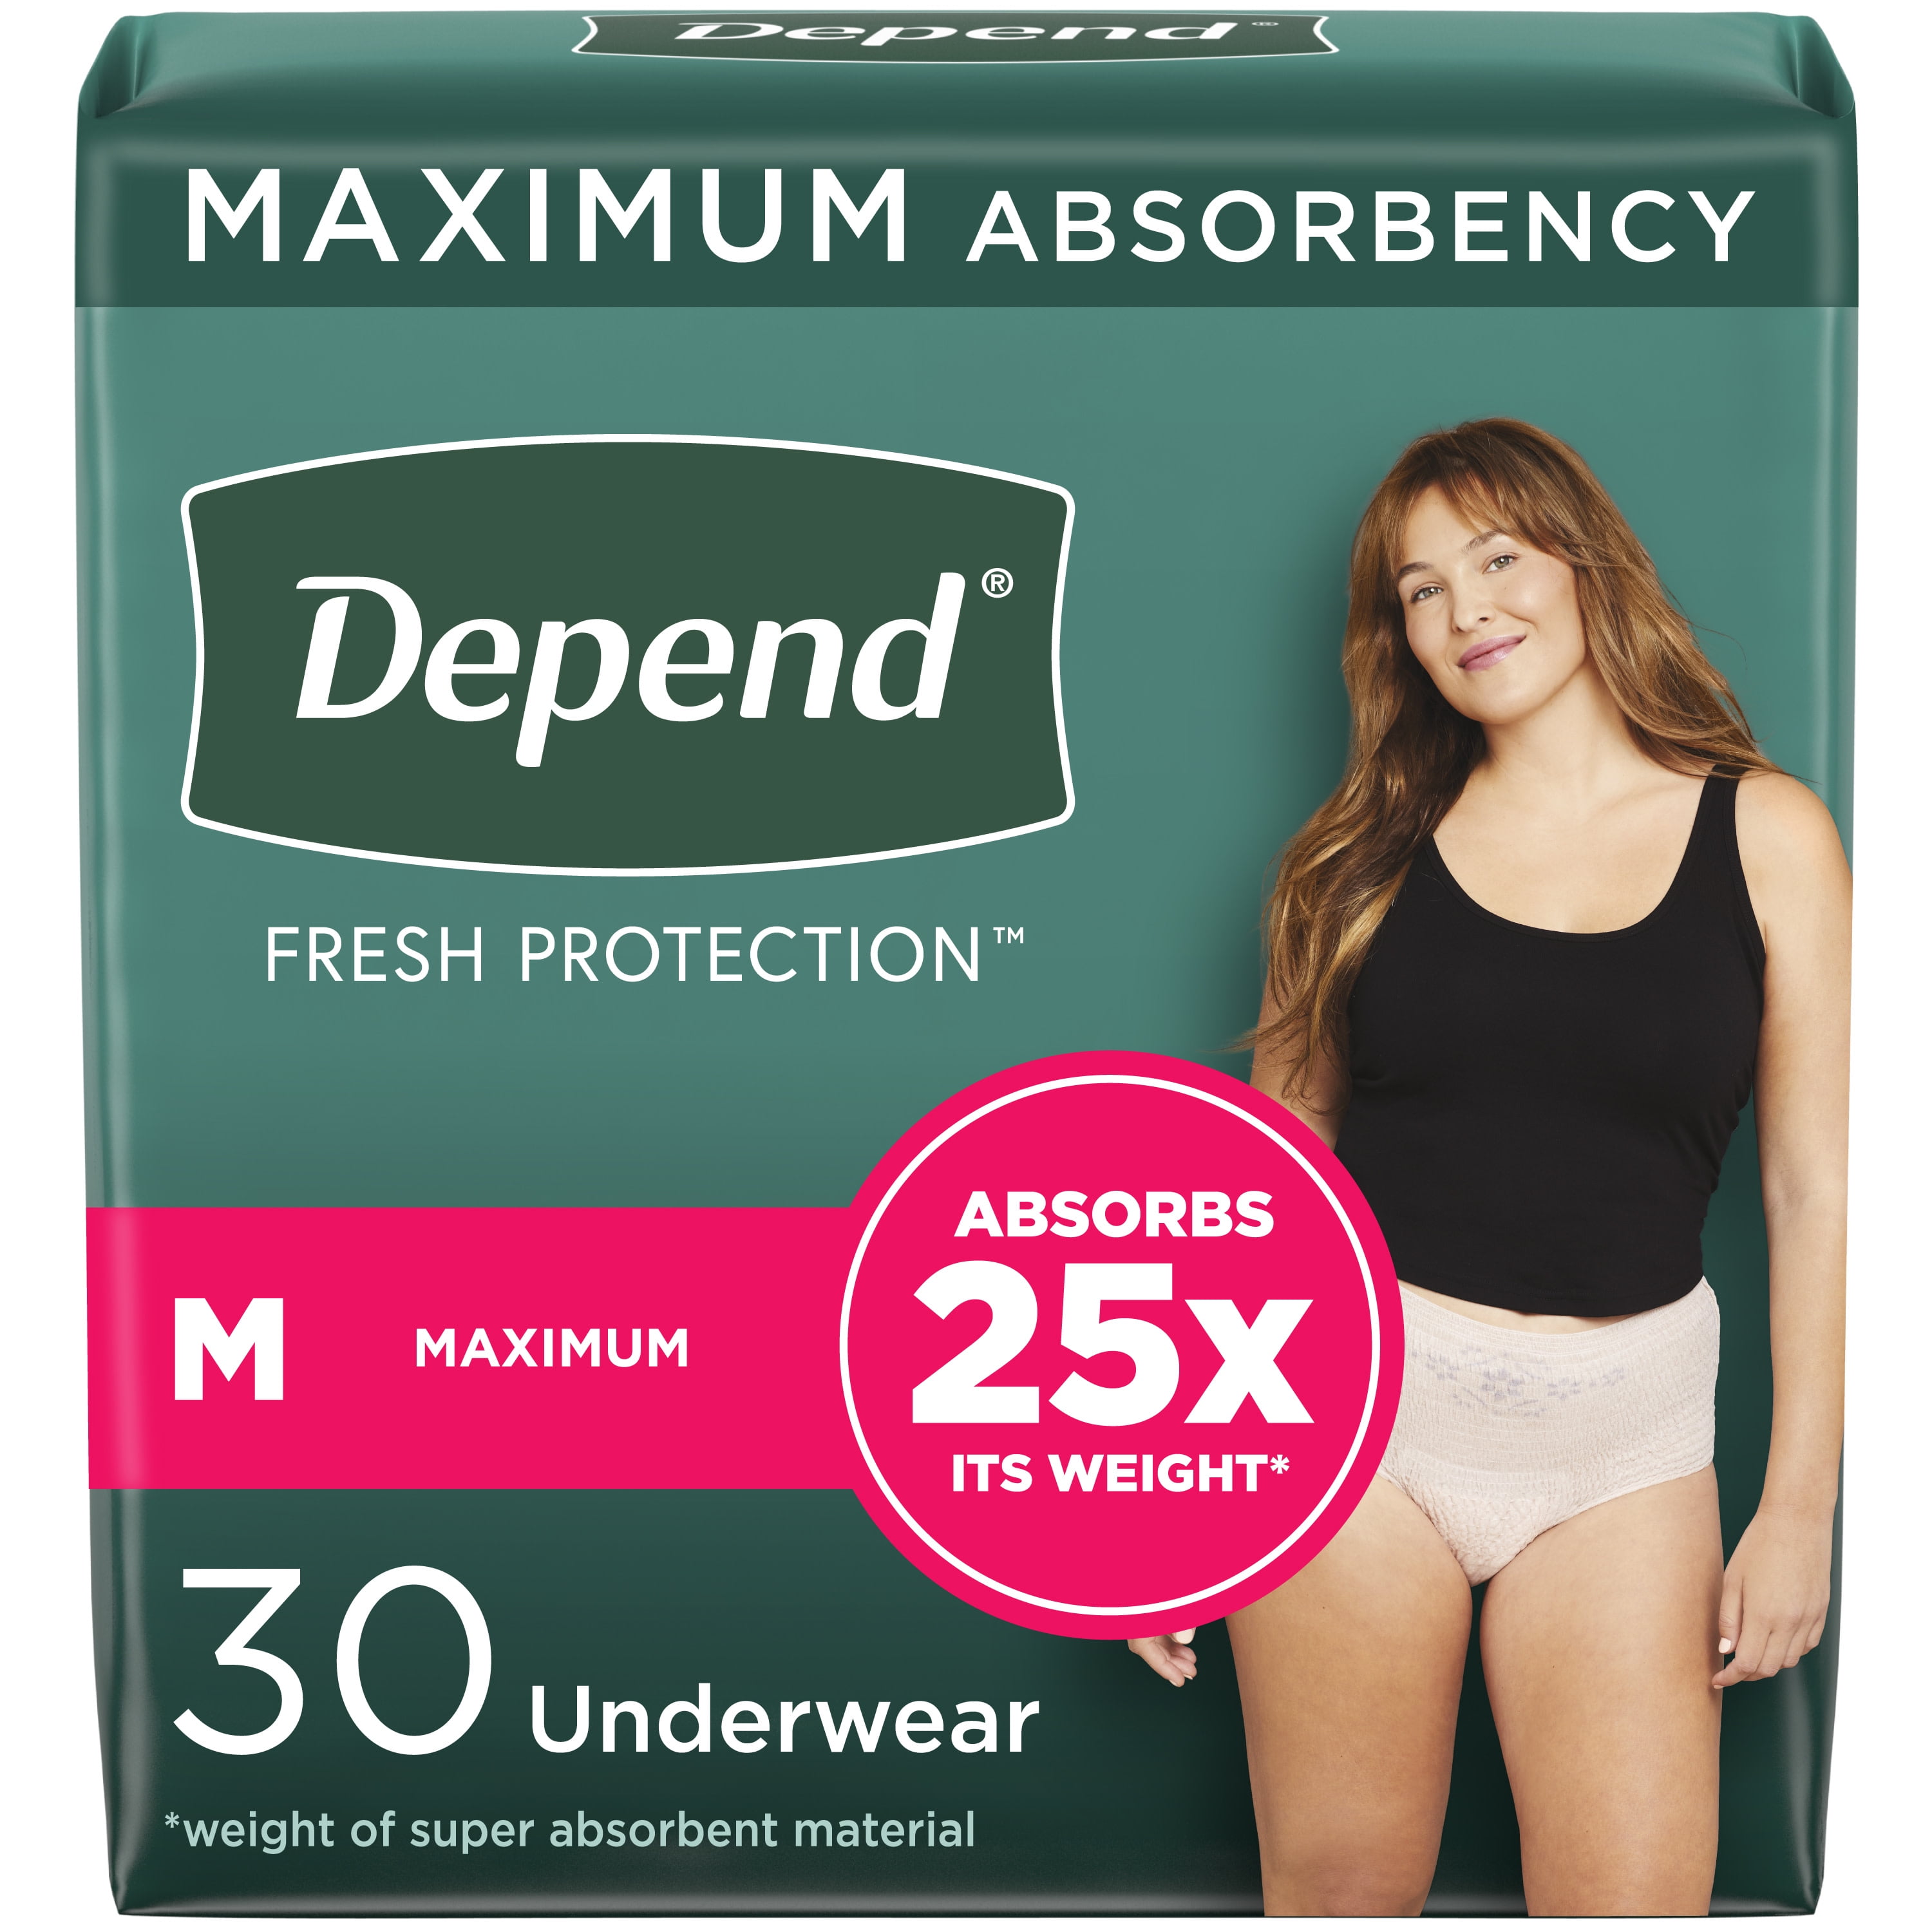  Adult Diaper Cover For Incontinence, Cloth Active